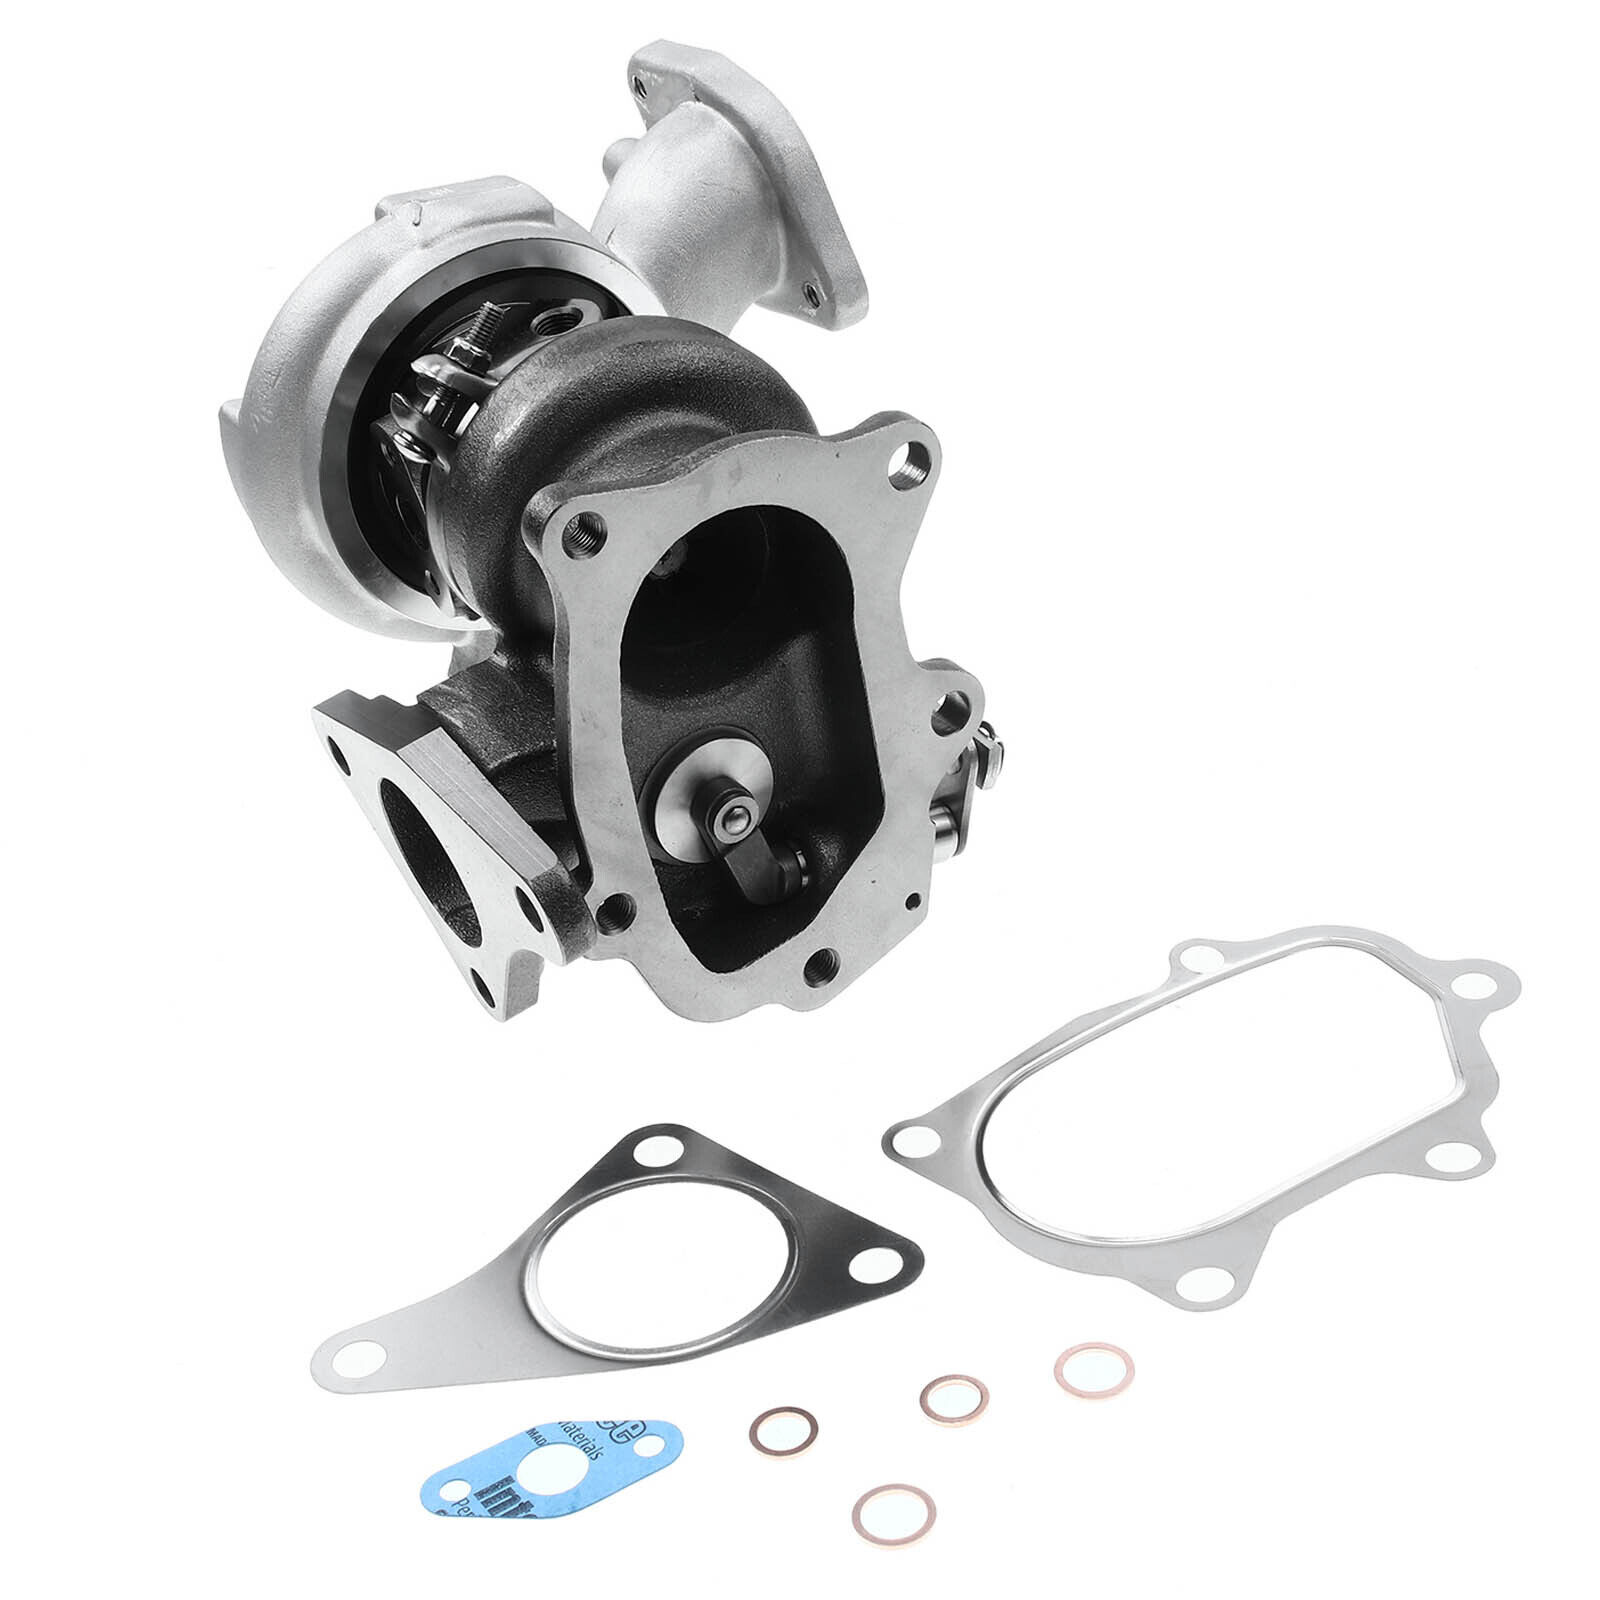 A-Premium Complete Turbo Turbocharger Kit, with Wastegate Actuator  Gasket,  Compatible with Subaru Forester 2008-2013, Impreza 2008-2014, 2.5L,  Replace# 14411AA710, 14411AA711